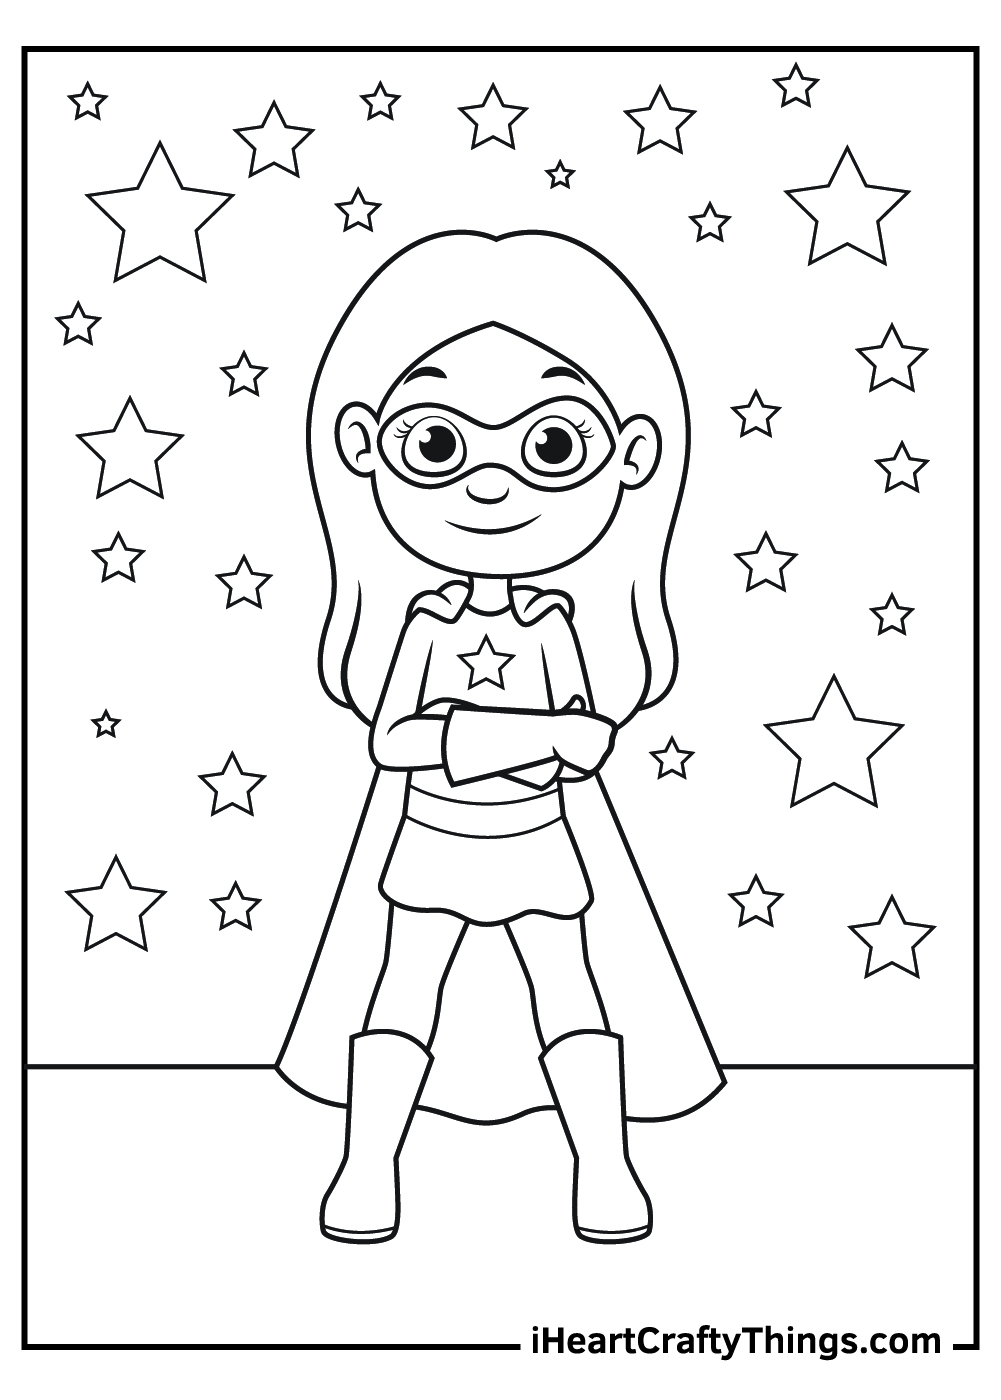 Superhero Coloring Pages Updated 20